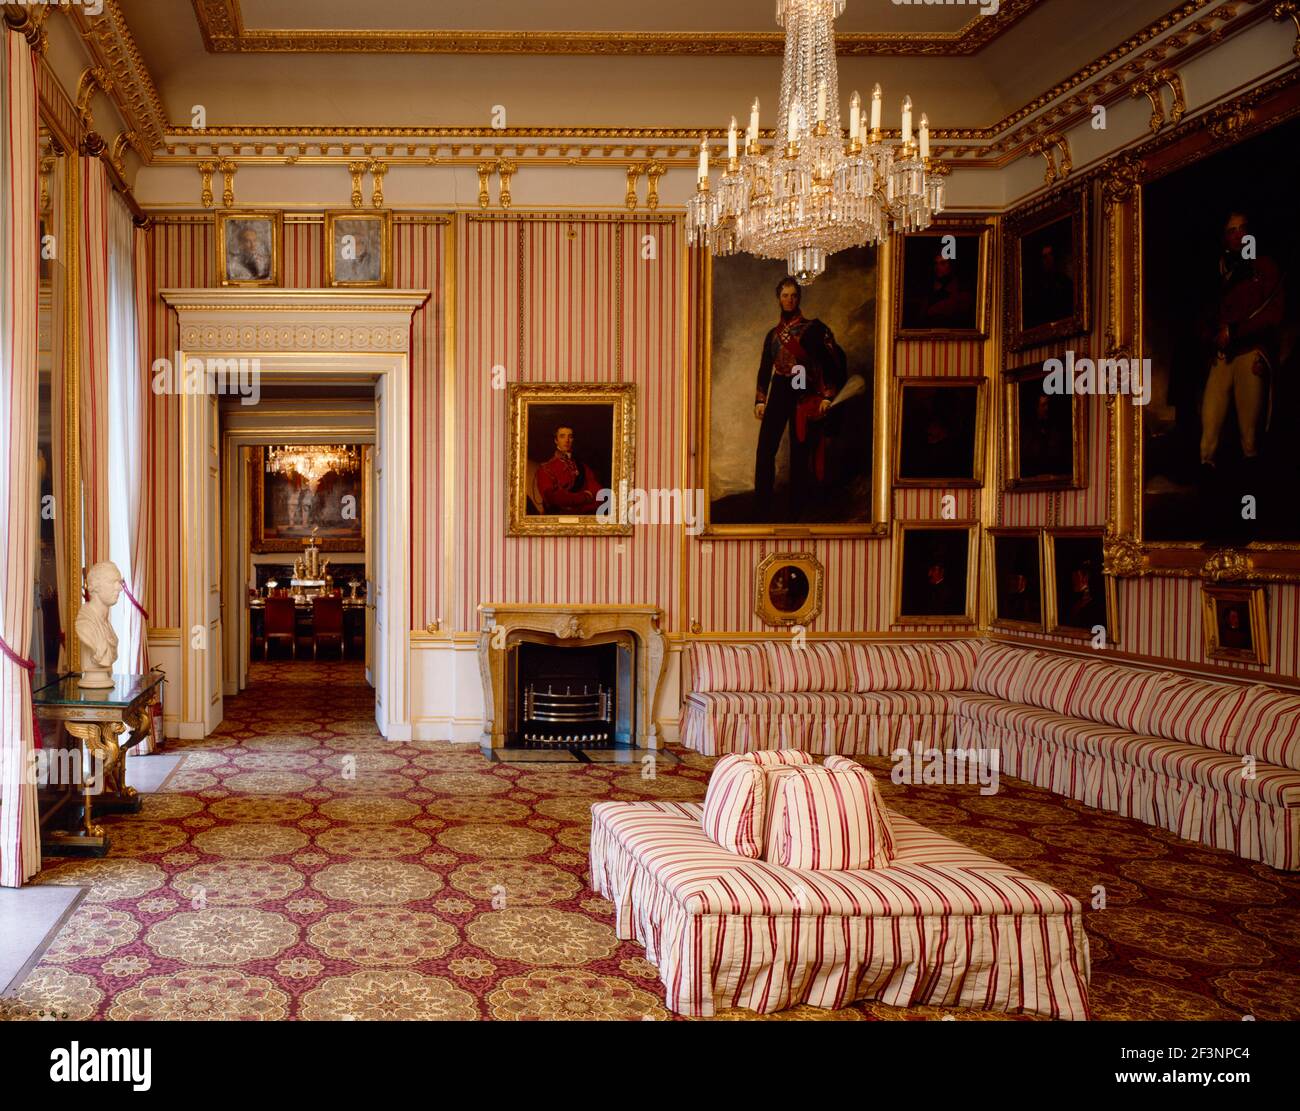 APSLEY HOUSE, London. Interior view of the Striped Drawing Room looking ...